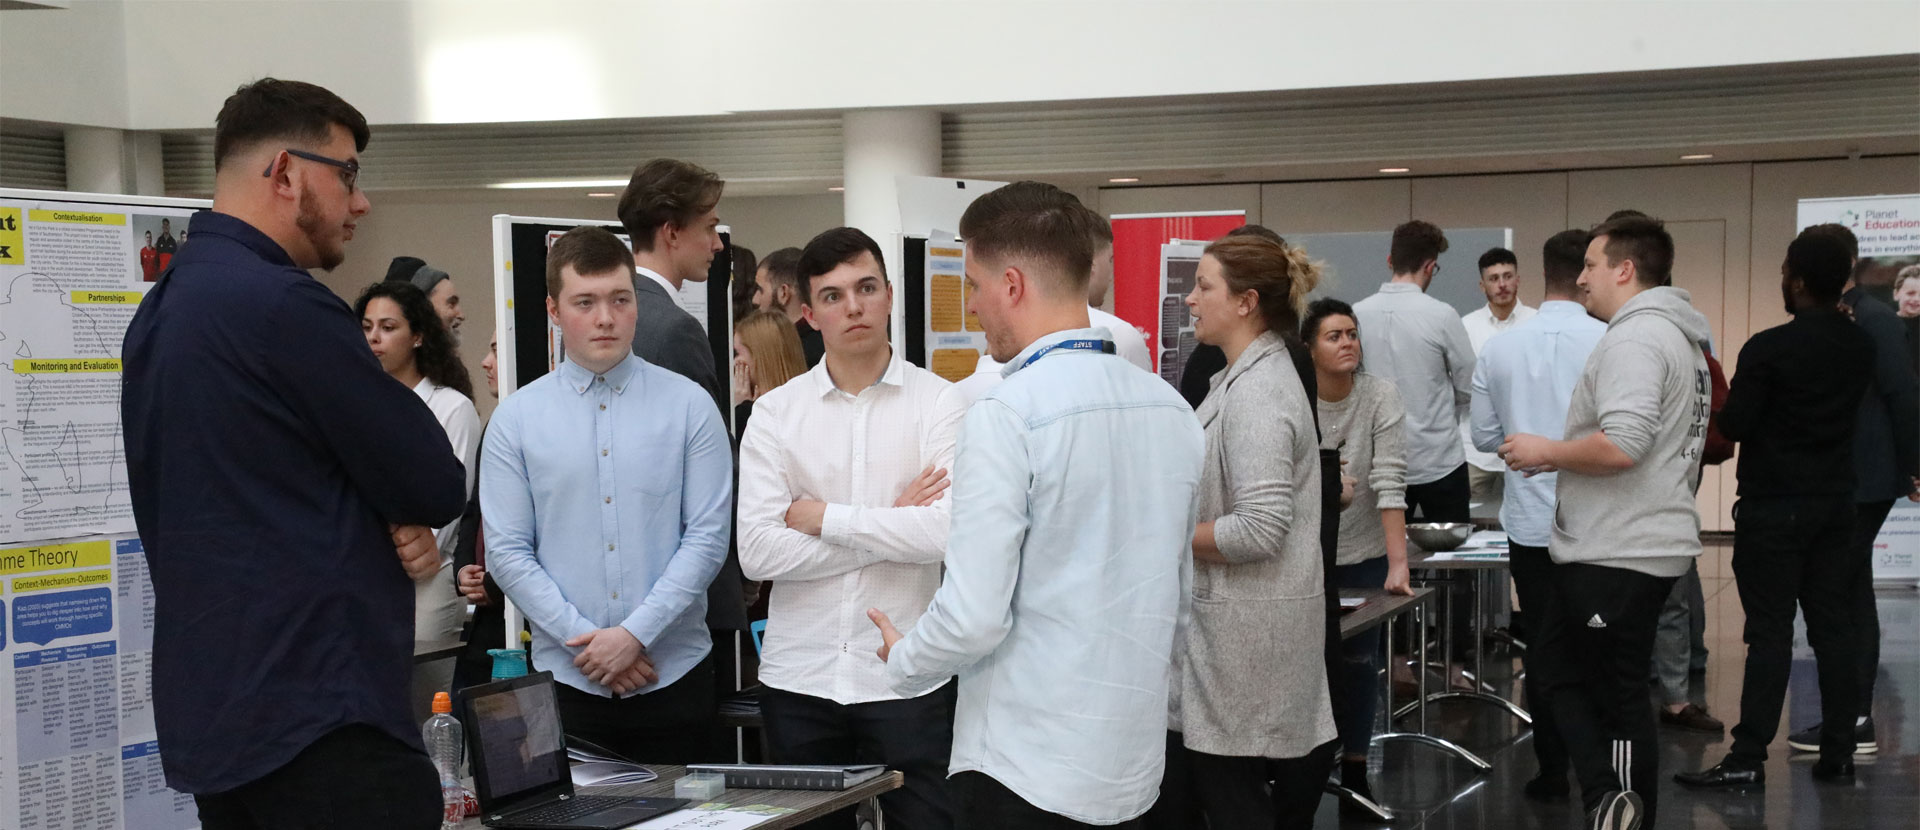 Students talking to guests about their projects at the Community Innovation Symposium